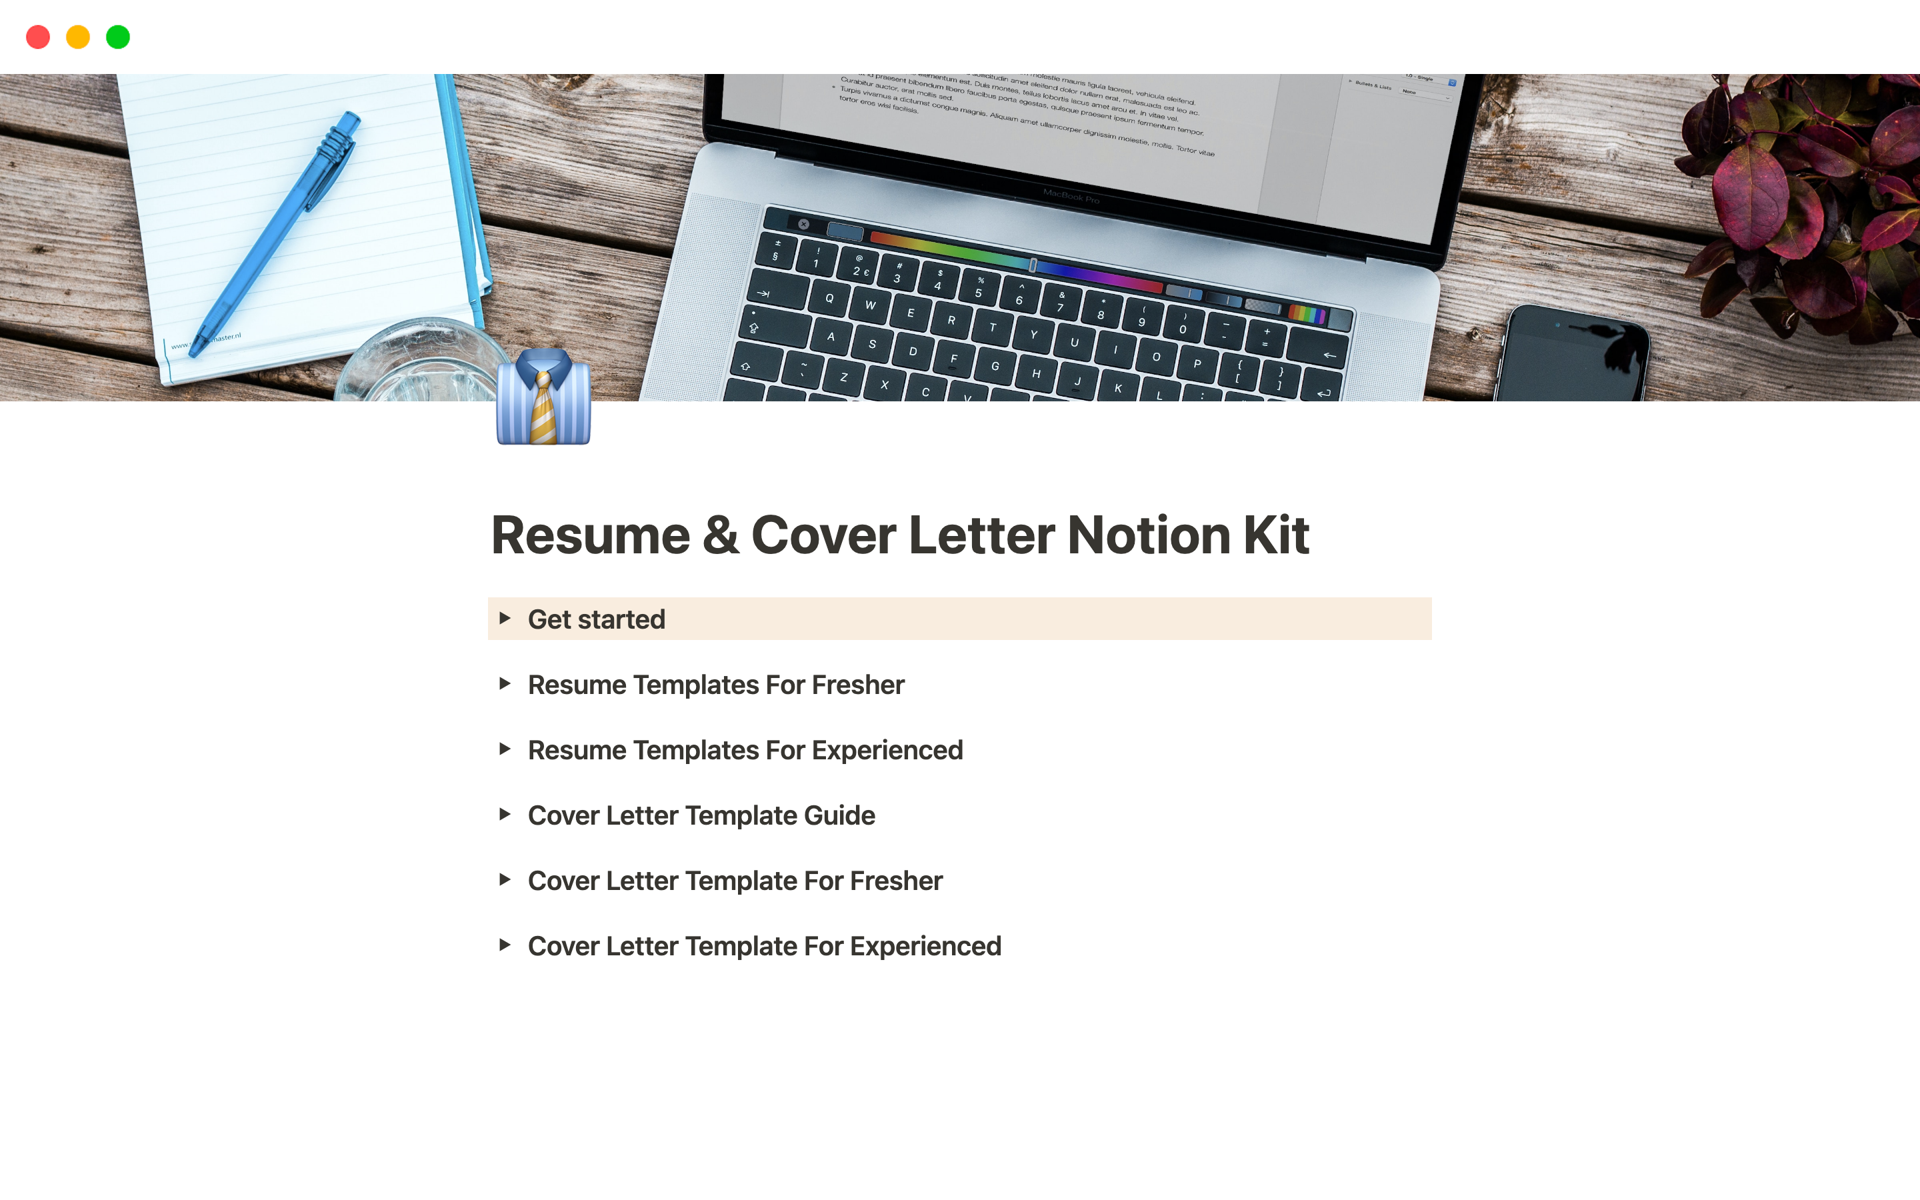 A template preview for Resume & Cover Letter Notion Kit